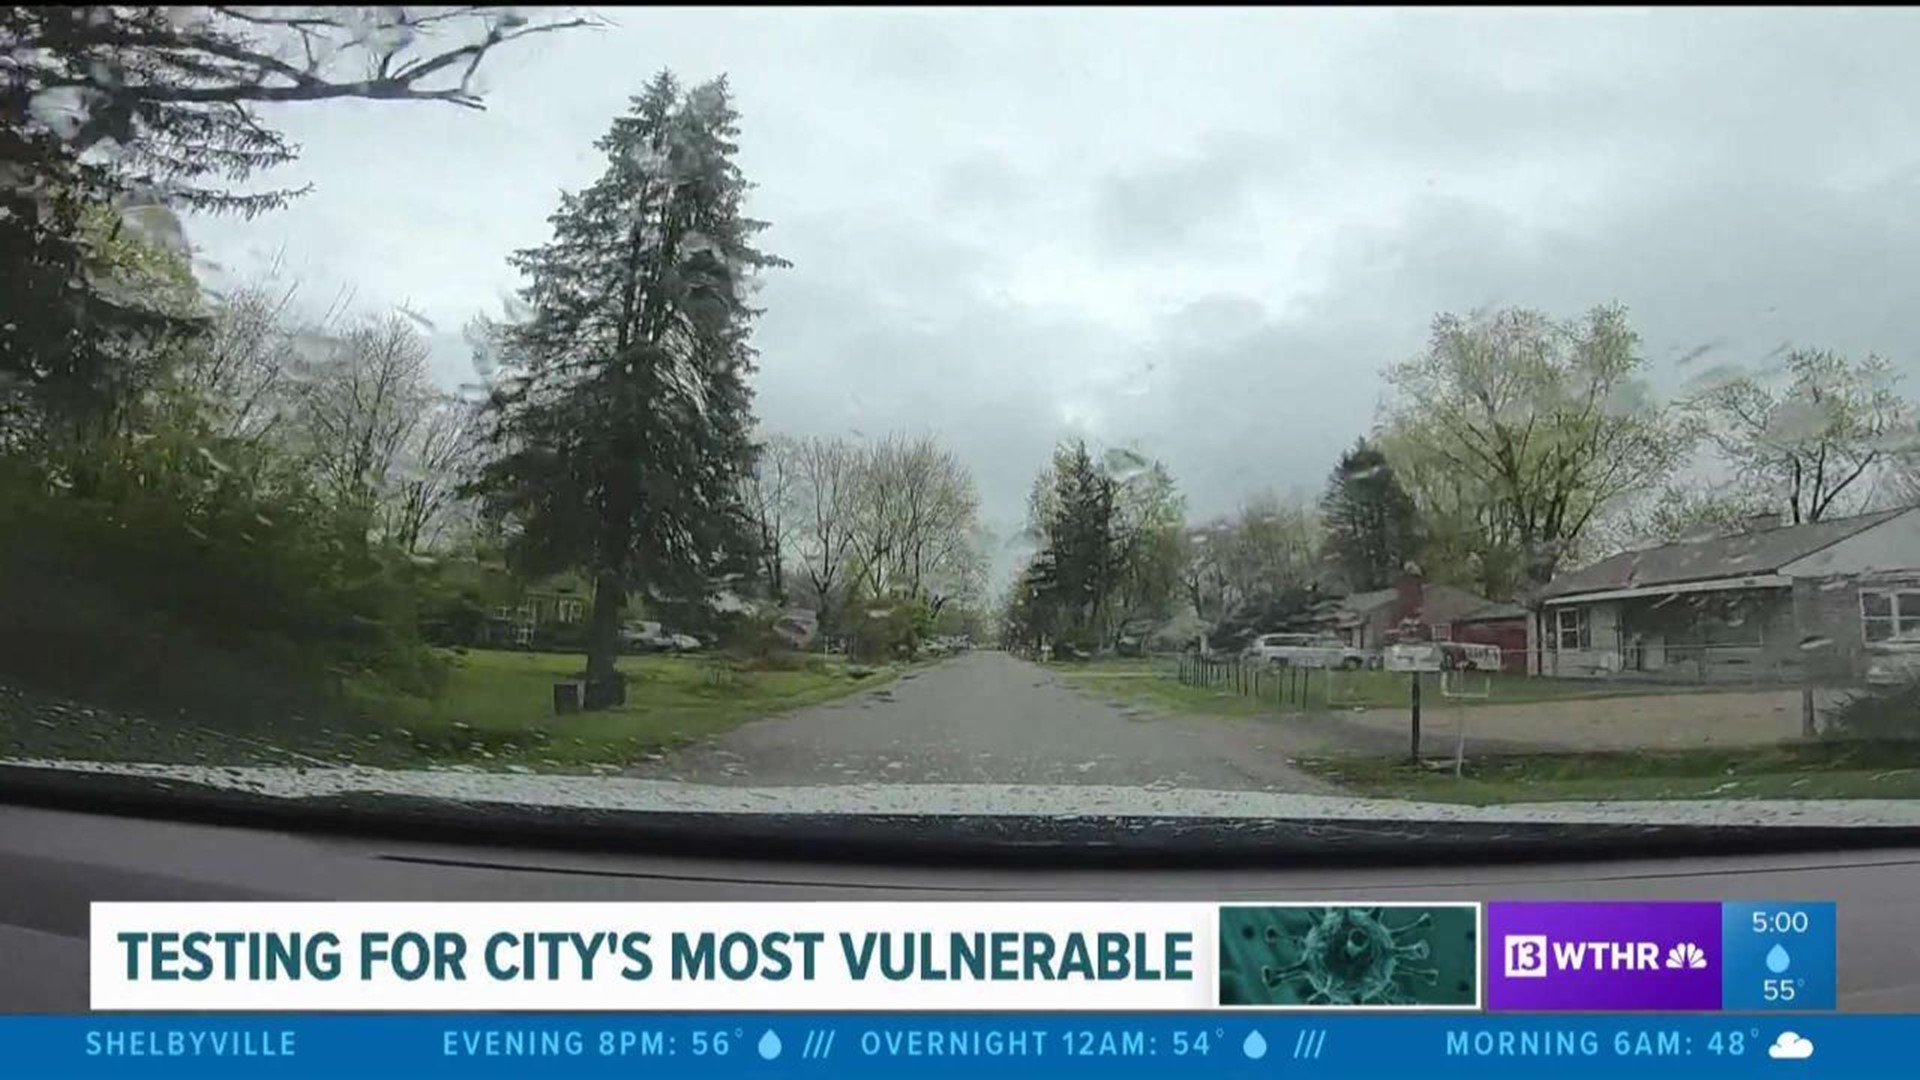 Testing for city's most vulnerable